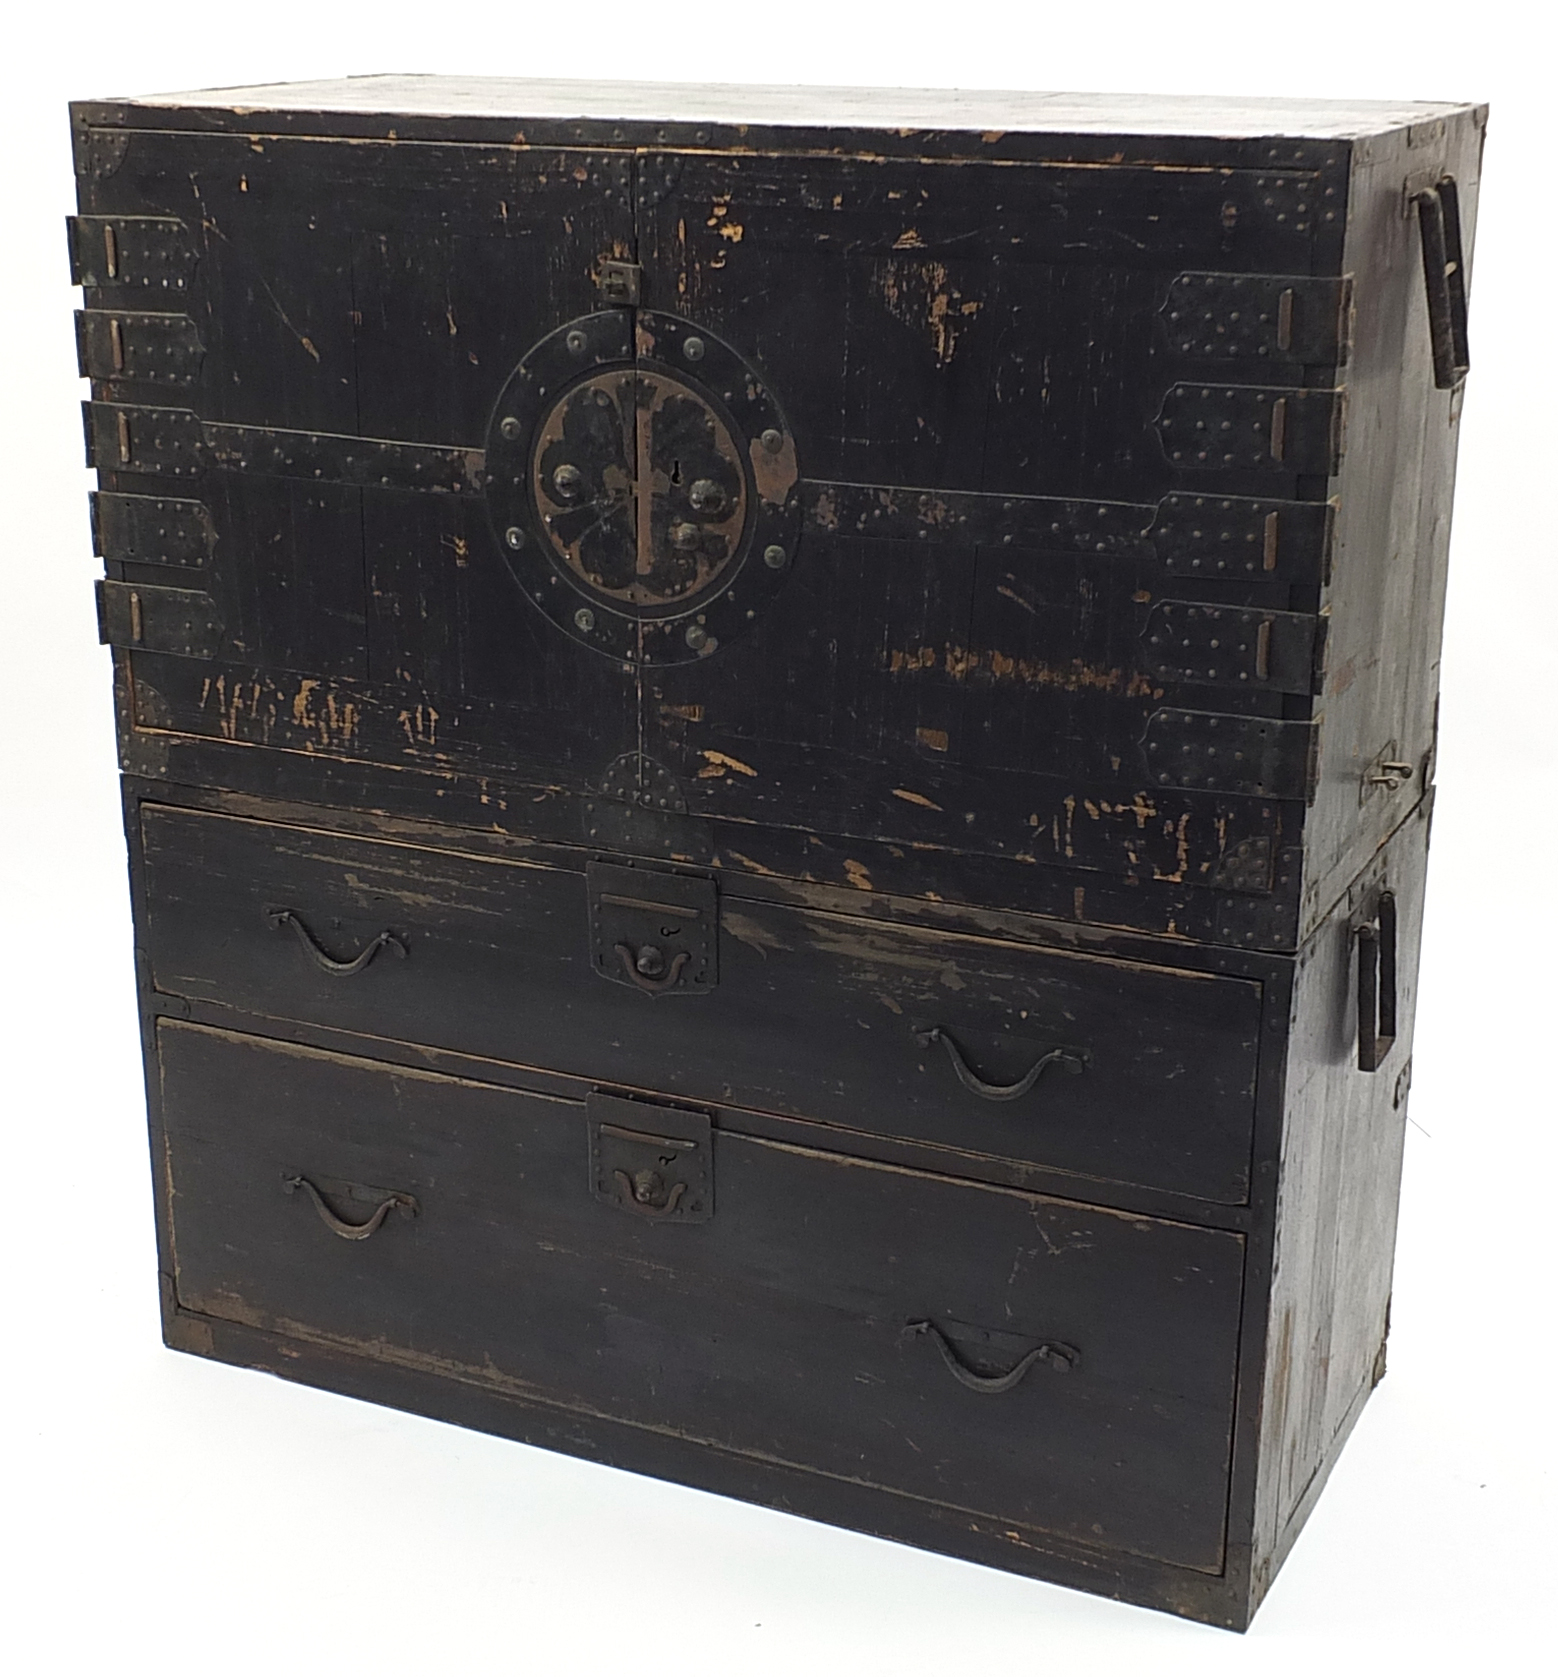 19th century Japanese iron bound two section tansu chest, 93.5cm H x 91cm W x 41.5cm D - Image 3 of 4